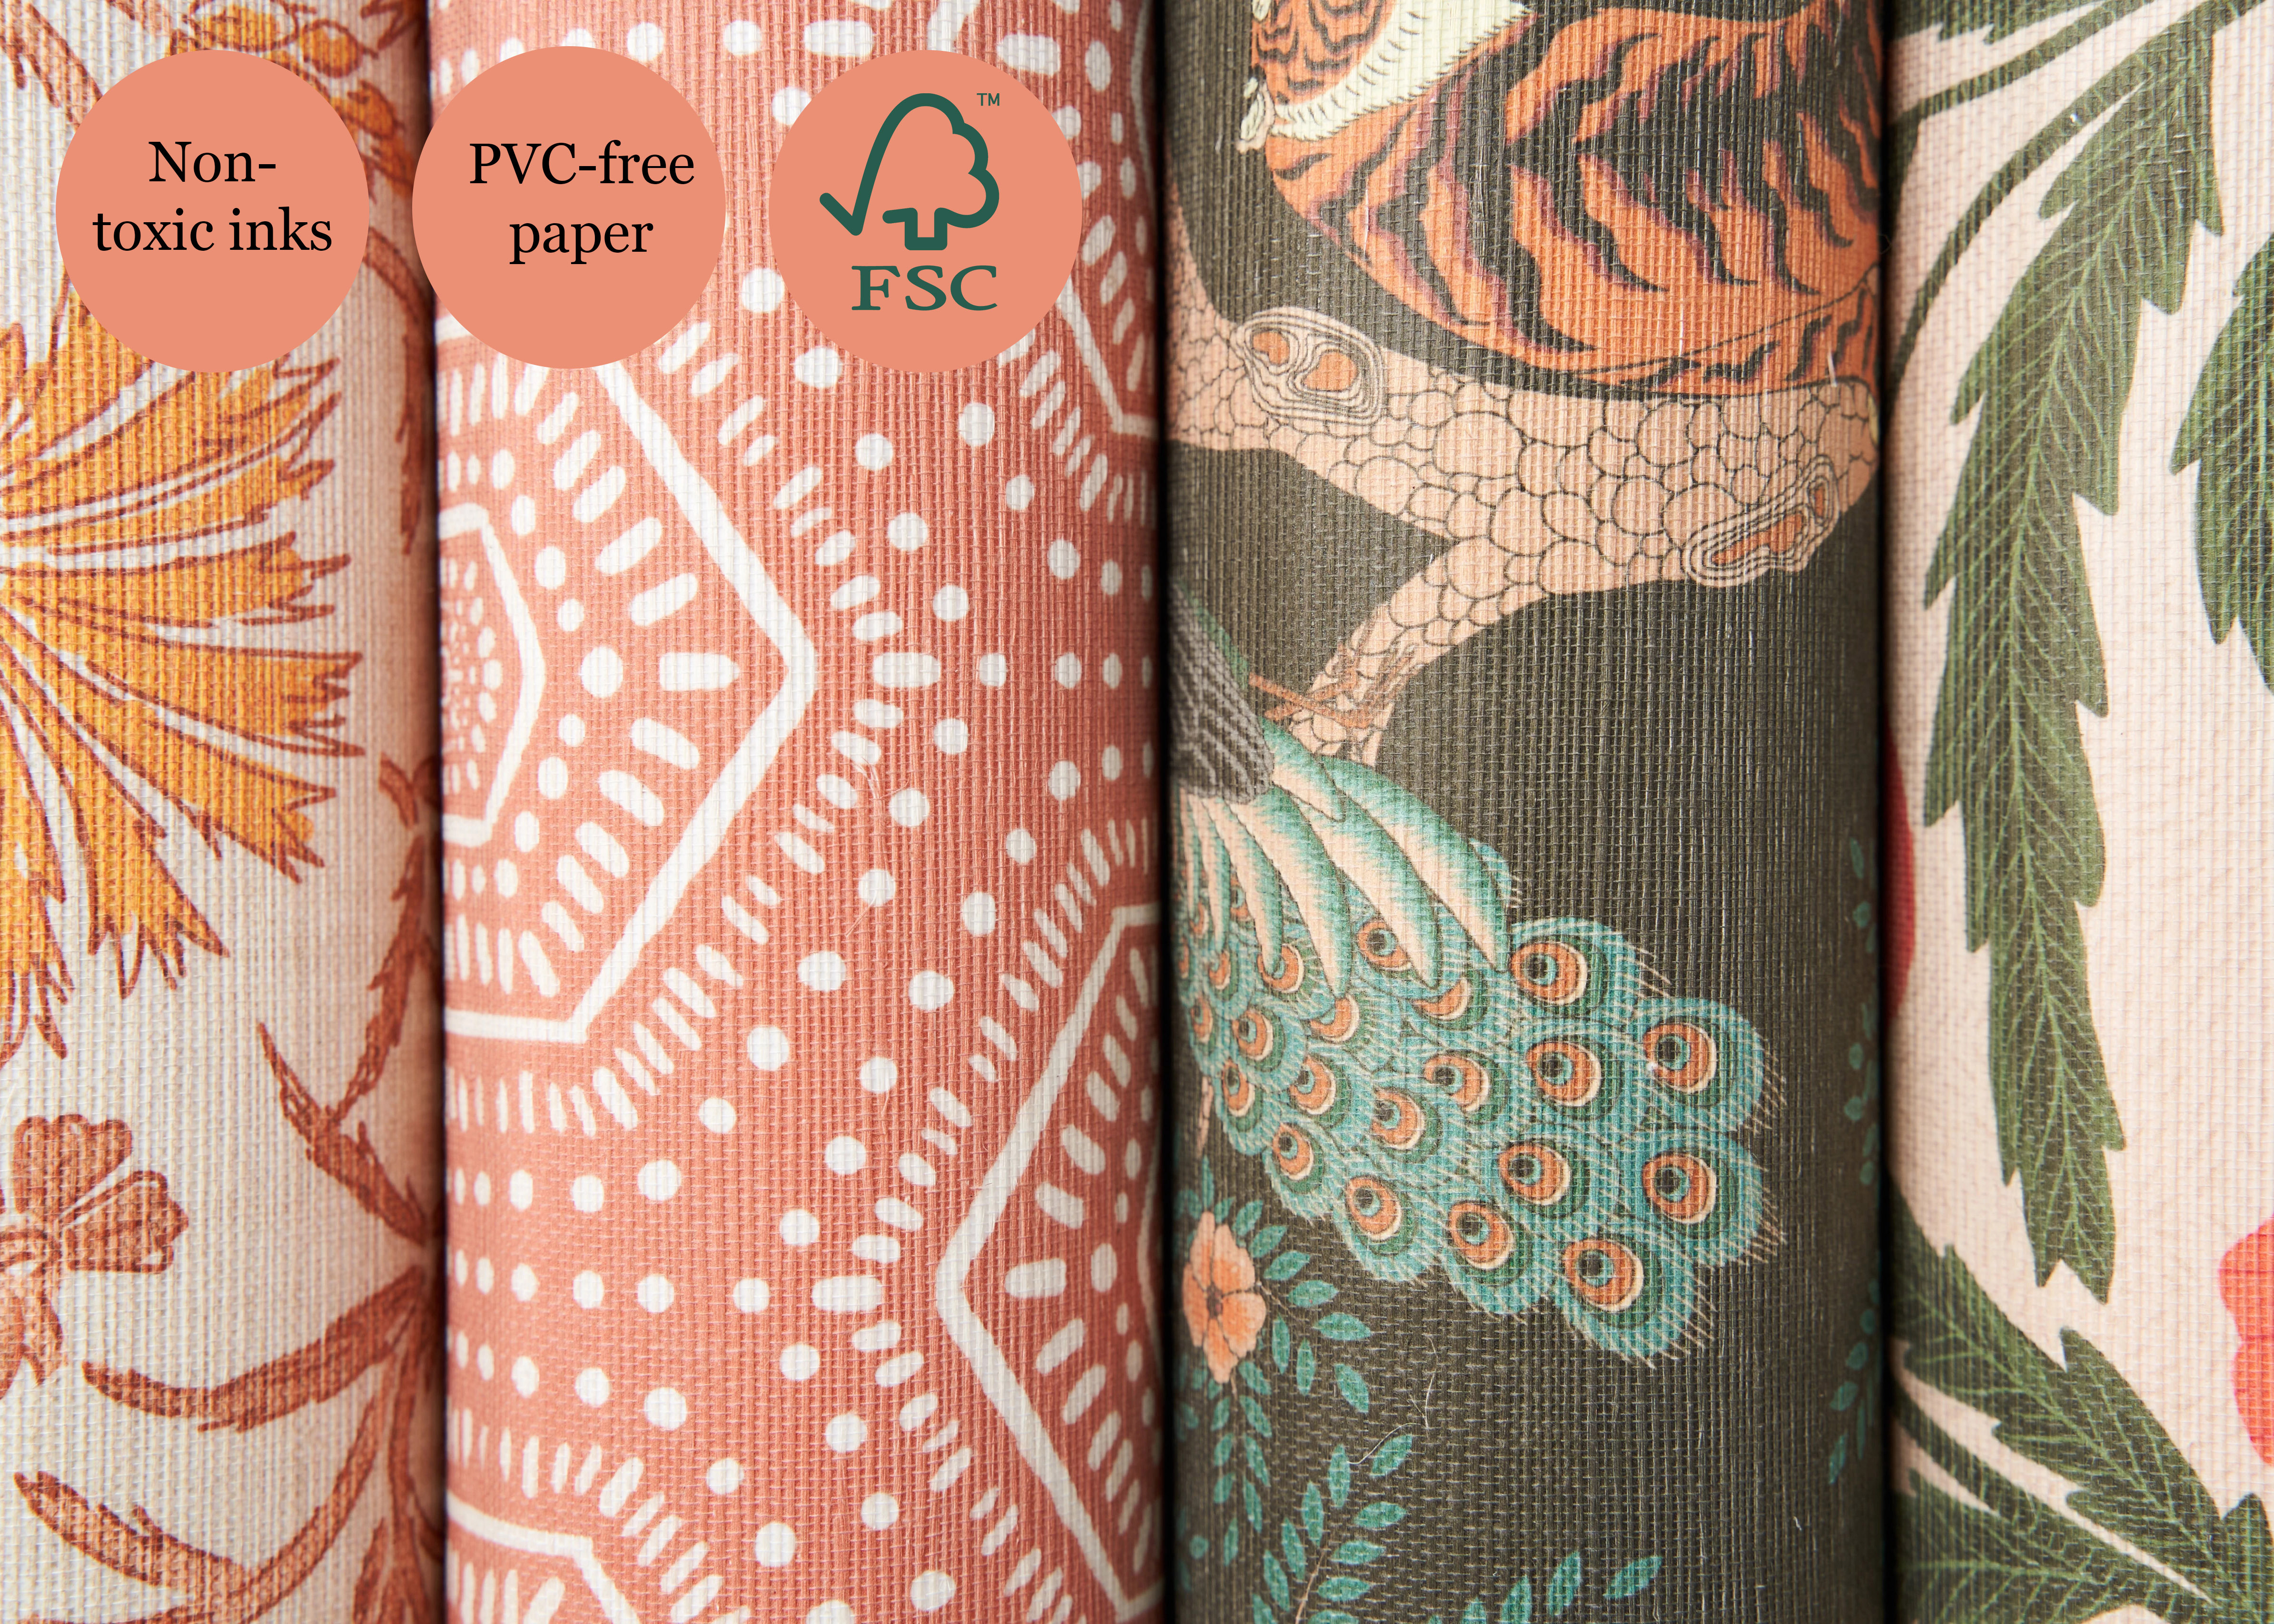 Rolls of wallpaper with text stating "non-toxic inks, PVC-free paper" and FSC logo